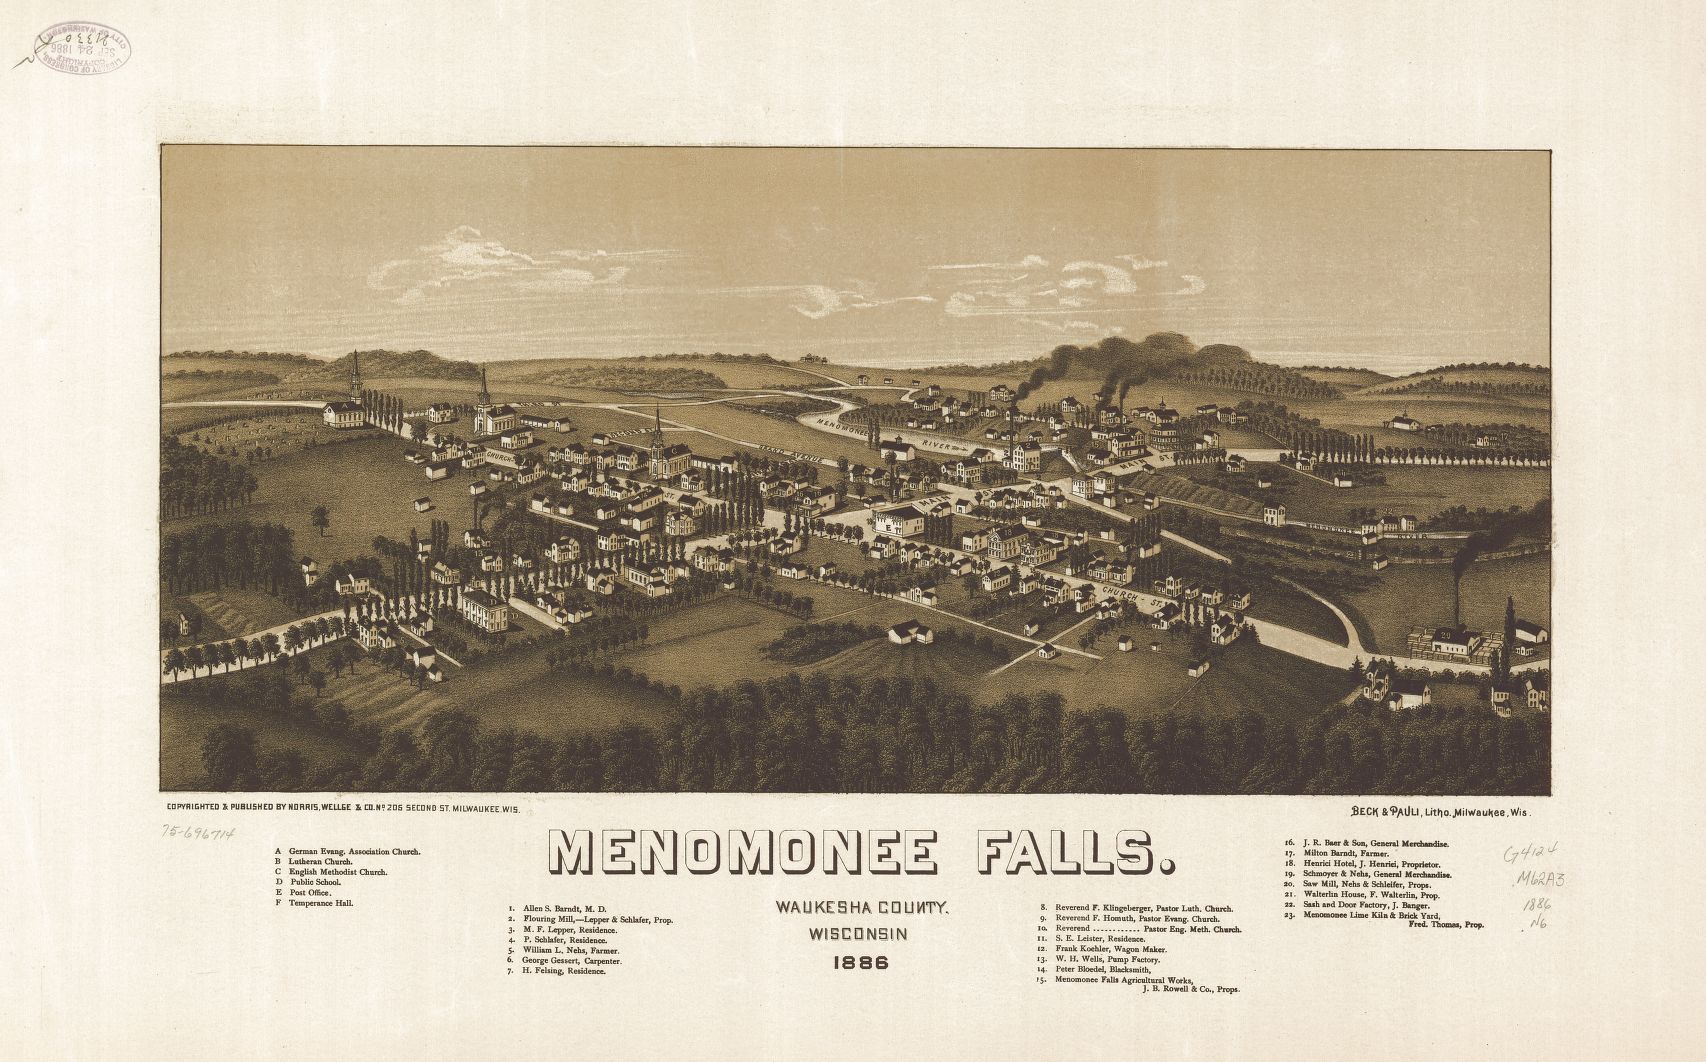 A view of Menomonee Falls in 1886, highlighting its industrial operations, churches, and both wild and planted trees.